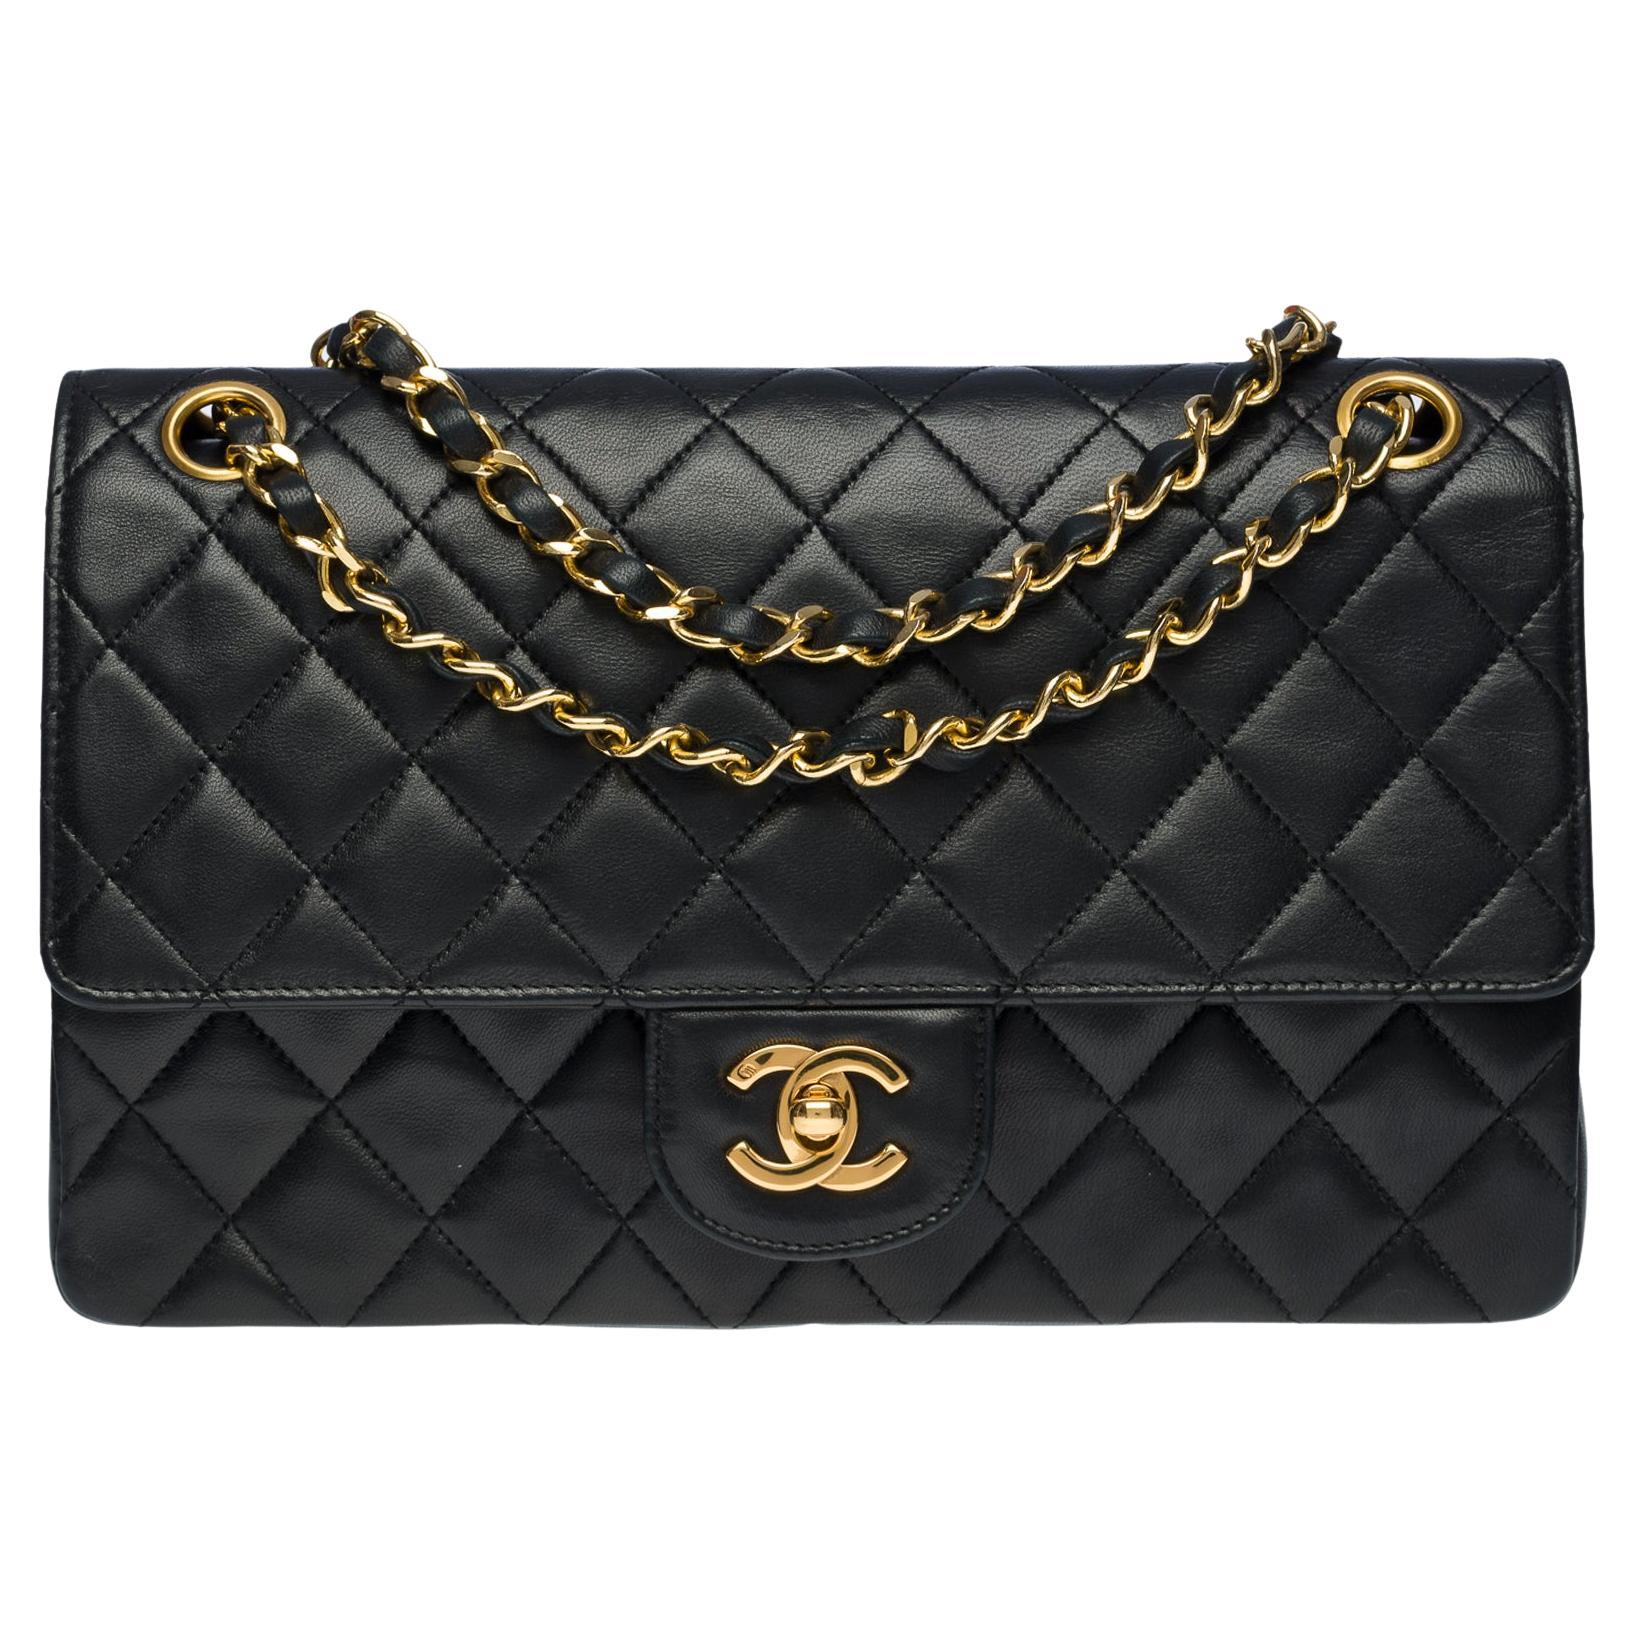 Chanel Medium Timeless double flap shoulder bag in black quilted lambskin, GHW